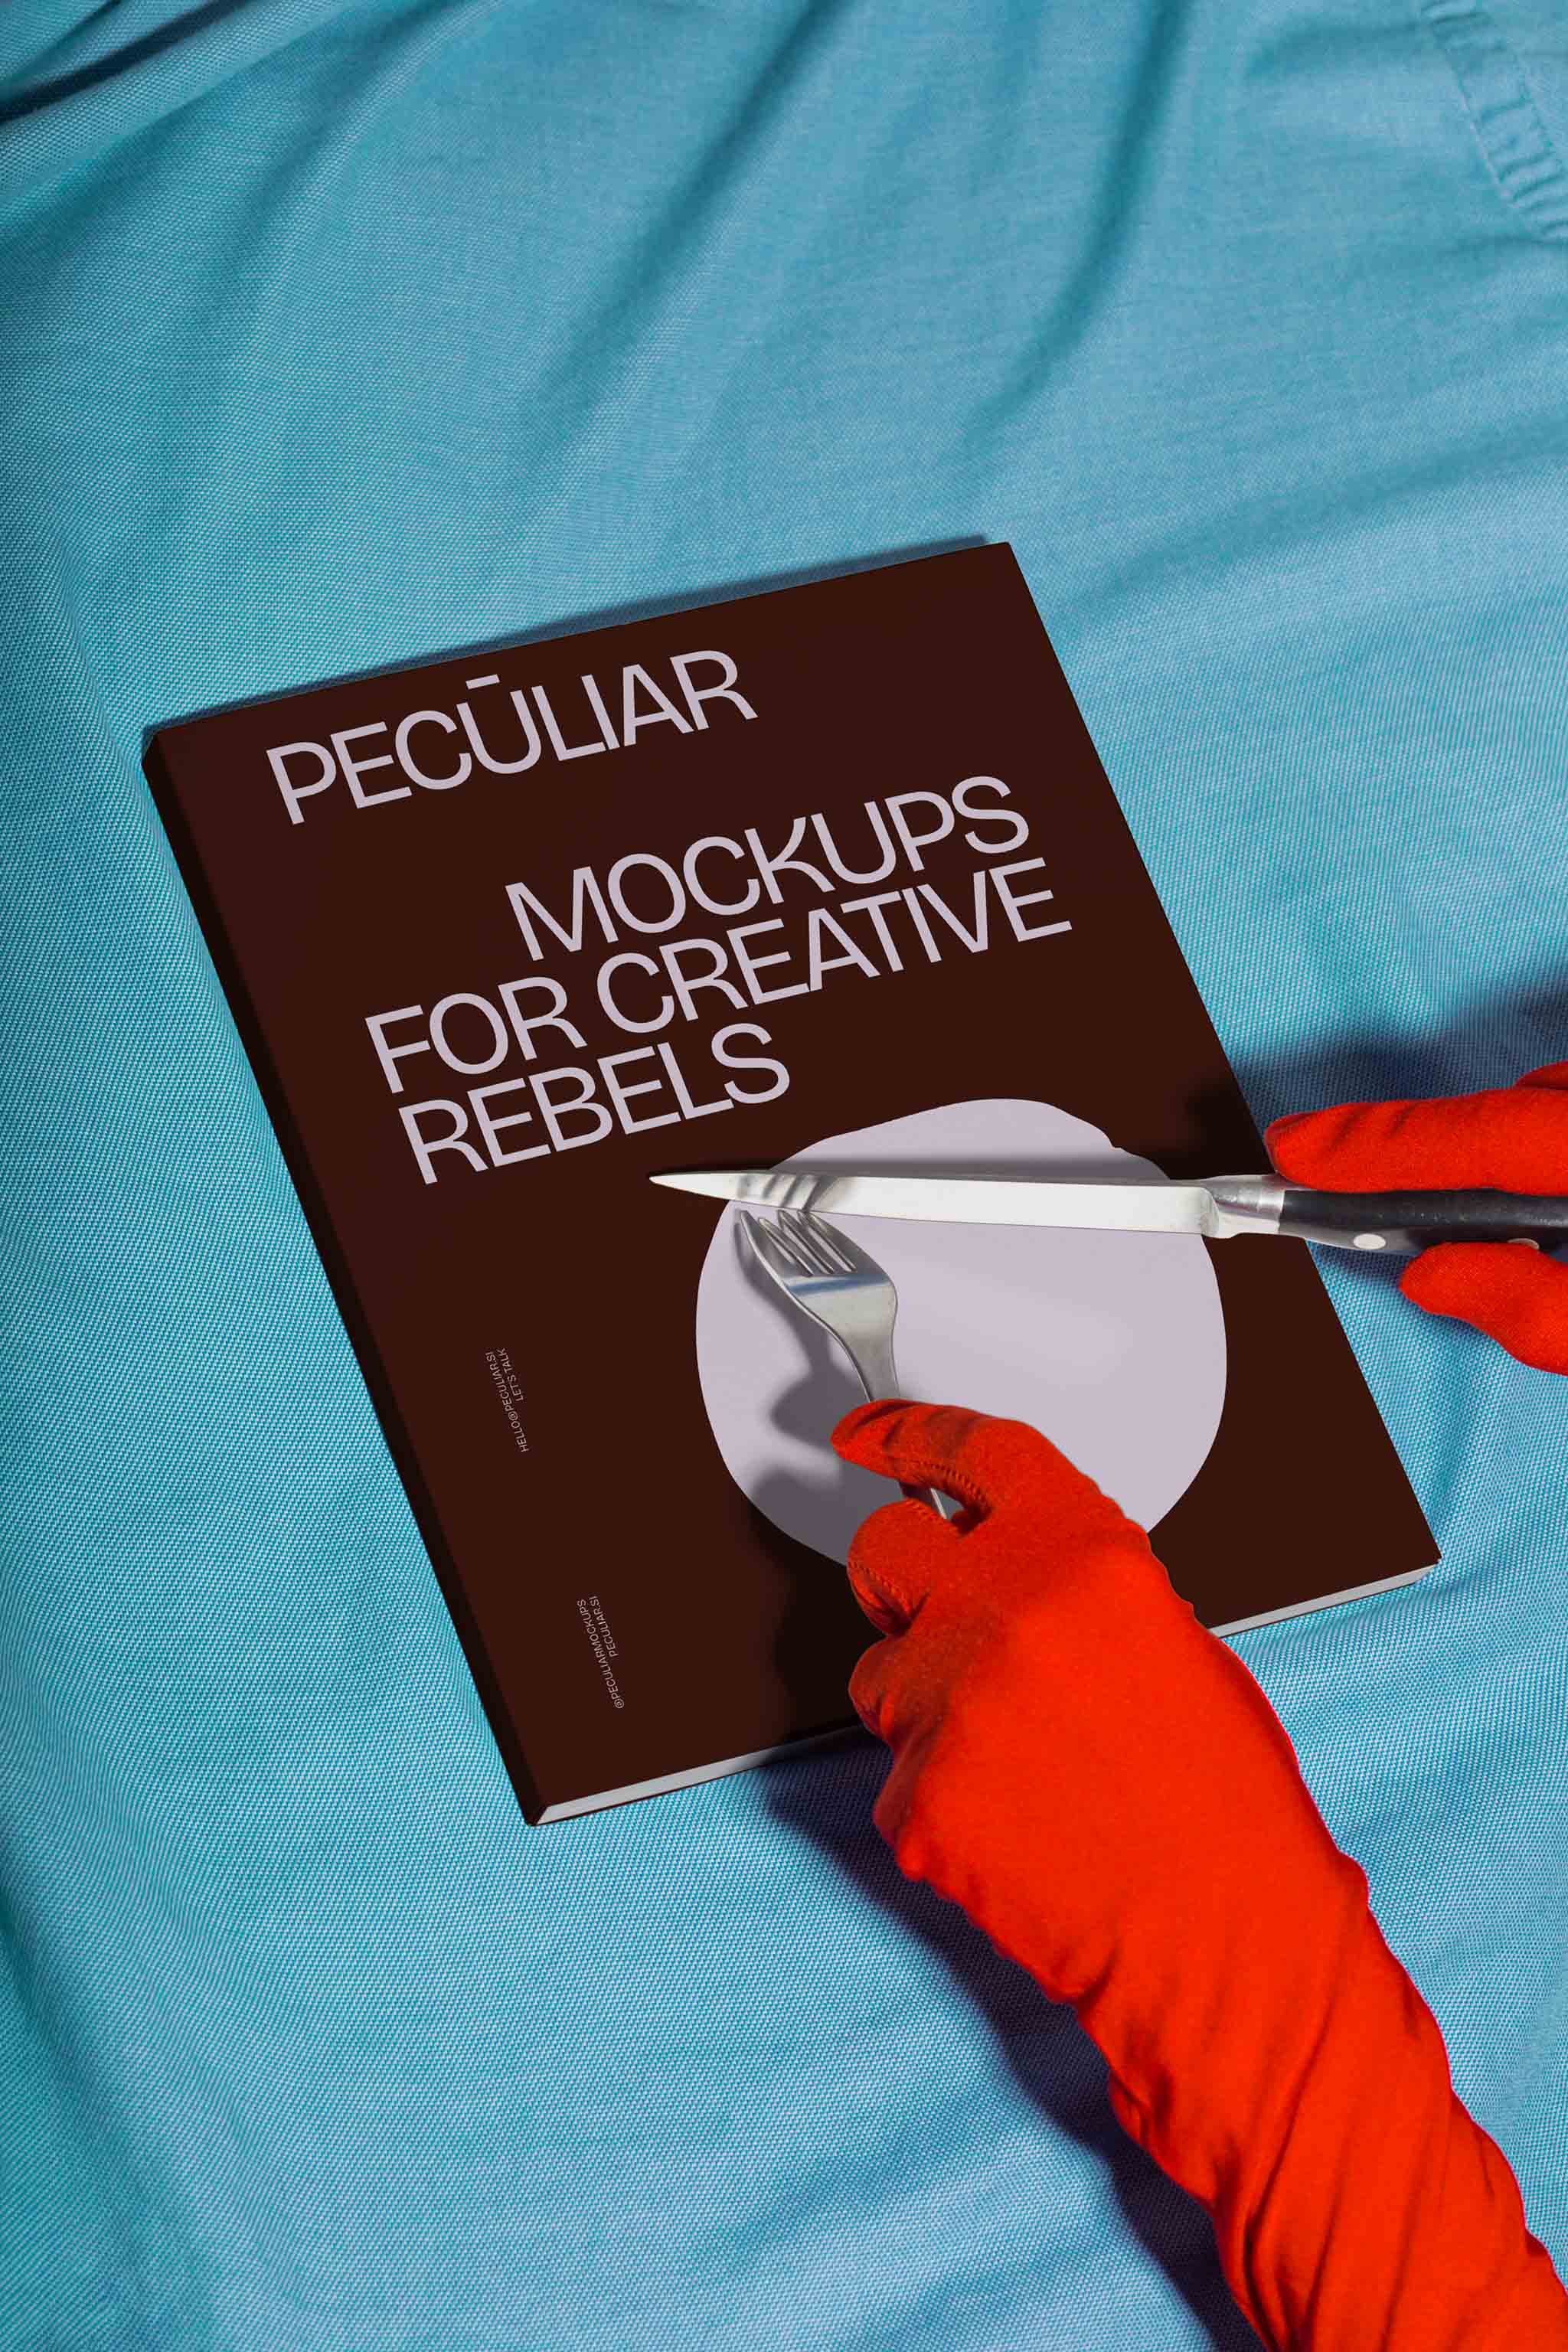 Two gloved hands holding utensils over a book cover mockup set against blue fabric, in use example.